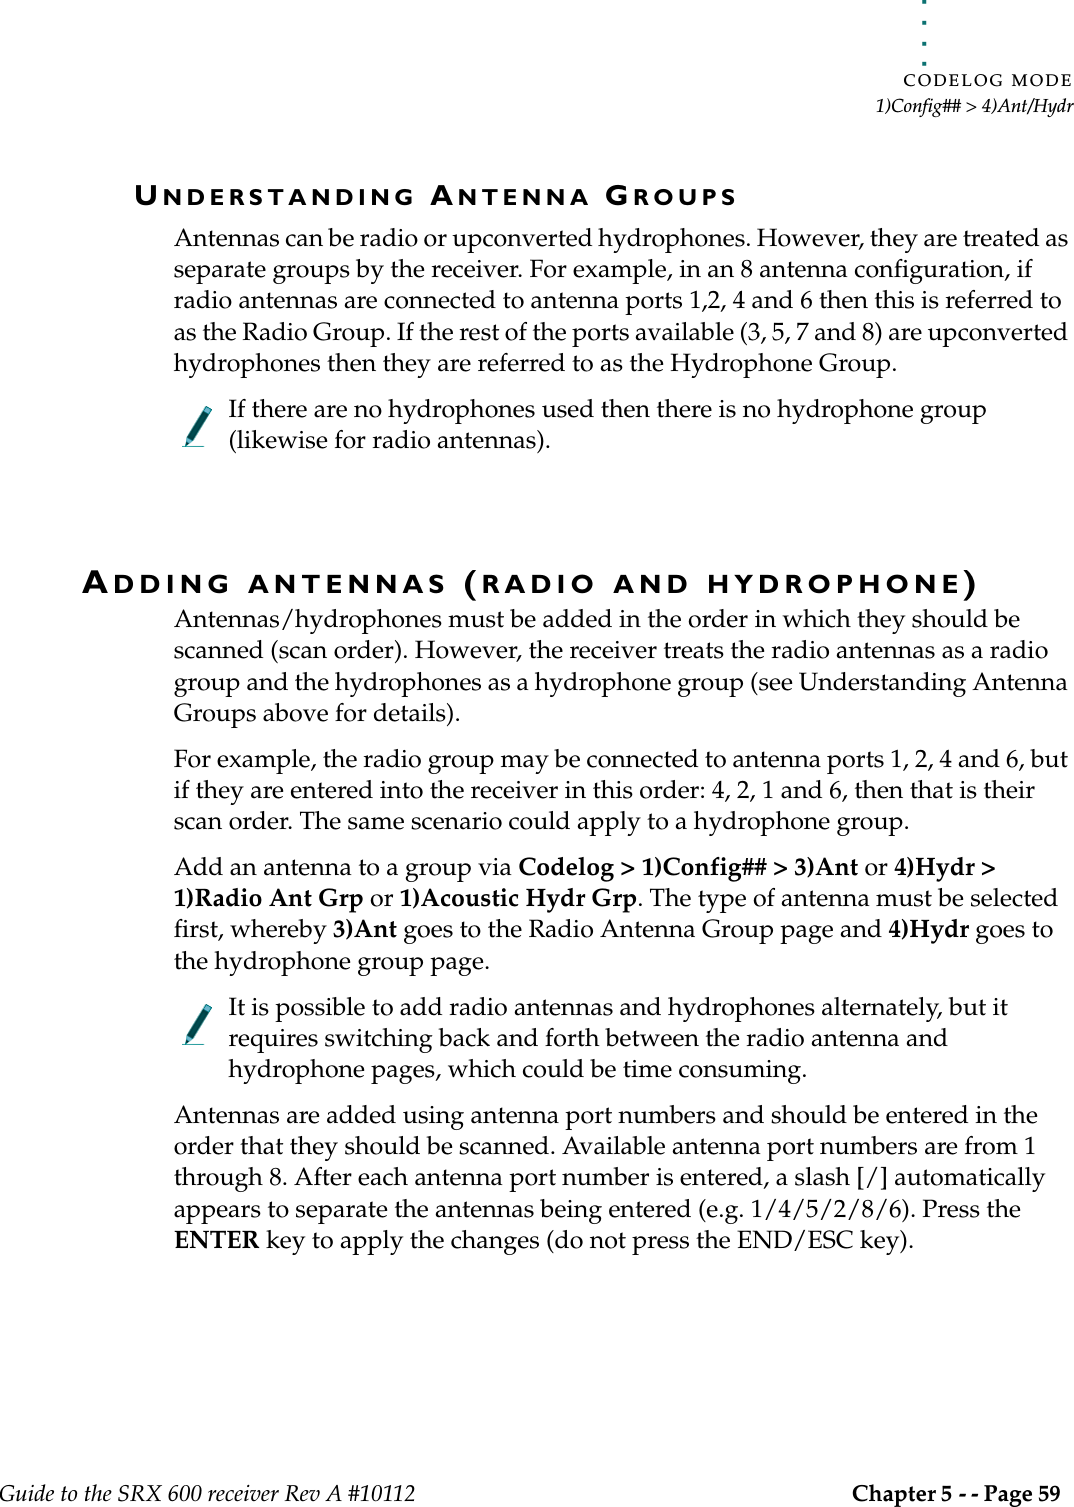 . . . . .CODELOG MODE1)Config## &gt; 4)Ant/HydrGuide to the SRX 600 receiver Rev A #10112 Chapter 5 - - Page 59 UNDERSTANDING ANTENNA GROUPSAntennas can be radio or upconverted hydrophones. However, they are treated as separate groups by the receiver. For example, in an 8 antenna configuration, if radio antennas are connected to antenna ports 1,2, 4 and 6 then this is referred to as the Radio Group. If the rest of the ports available (3, 5, 7 and 8) are upconverted hydrophones then they are referred to as the Hydrophone Group.If there are no hydrophones used then there is no hydrophone group (likewise for radio antennas).ADDING ANTENNAS (RADIO AND HYDROPHONE)Antennas/hydrophones must be added in the order in which they should be scanned (scan order). However, the receiver treats the radio antennas as a radio group and the hydrophones as a hydrophone group (see Understanding Antenna Groups above for details). For example, the radio group may be connected to antenna ports 1, 2, 4 and 6, but if they are entered into the receiver in this order: 4, 2, 1 and 6, then that is their scan order. The same scenario could apply to a hydrophone group.Add an antenna to a group via Codelog &gt; 1)Config## &gt; 3)Ant or 4)Hydr &gt; 1)Radio Ant Grp or 1)Acoustic Hydr Grp. The type of antenna must be selected first, whereby 3)Ant goes to the Radio Antenna Group page and 4)Hydr goes to the hydrophone group page.It is possible to add radio antennas and hydrophones alternately, but it requires switching back and forth between the radio antenna and hydrophone pages, which could be time consuming.Antennas are added using antenna port numbers and should be entered in the order that they should be scanned. Available antenna port numbers are from 1 through 8. After each antenna port number is entered, a slash [/] automatically appears to separate the antennas being entered (e.g. 1/4/5/2/8/6). Press the ENTER key to apply the changes (do not press the END/ESC key).